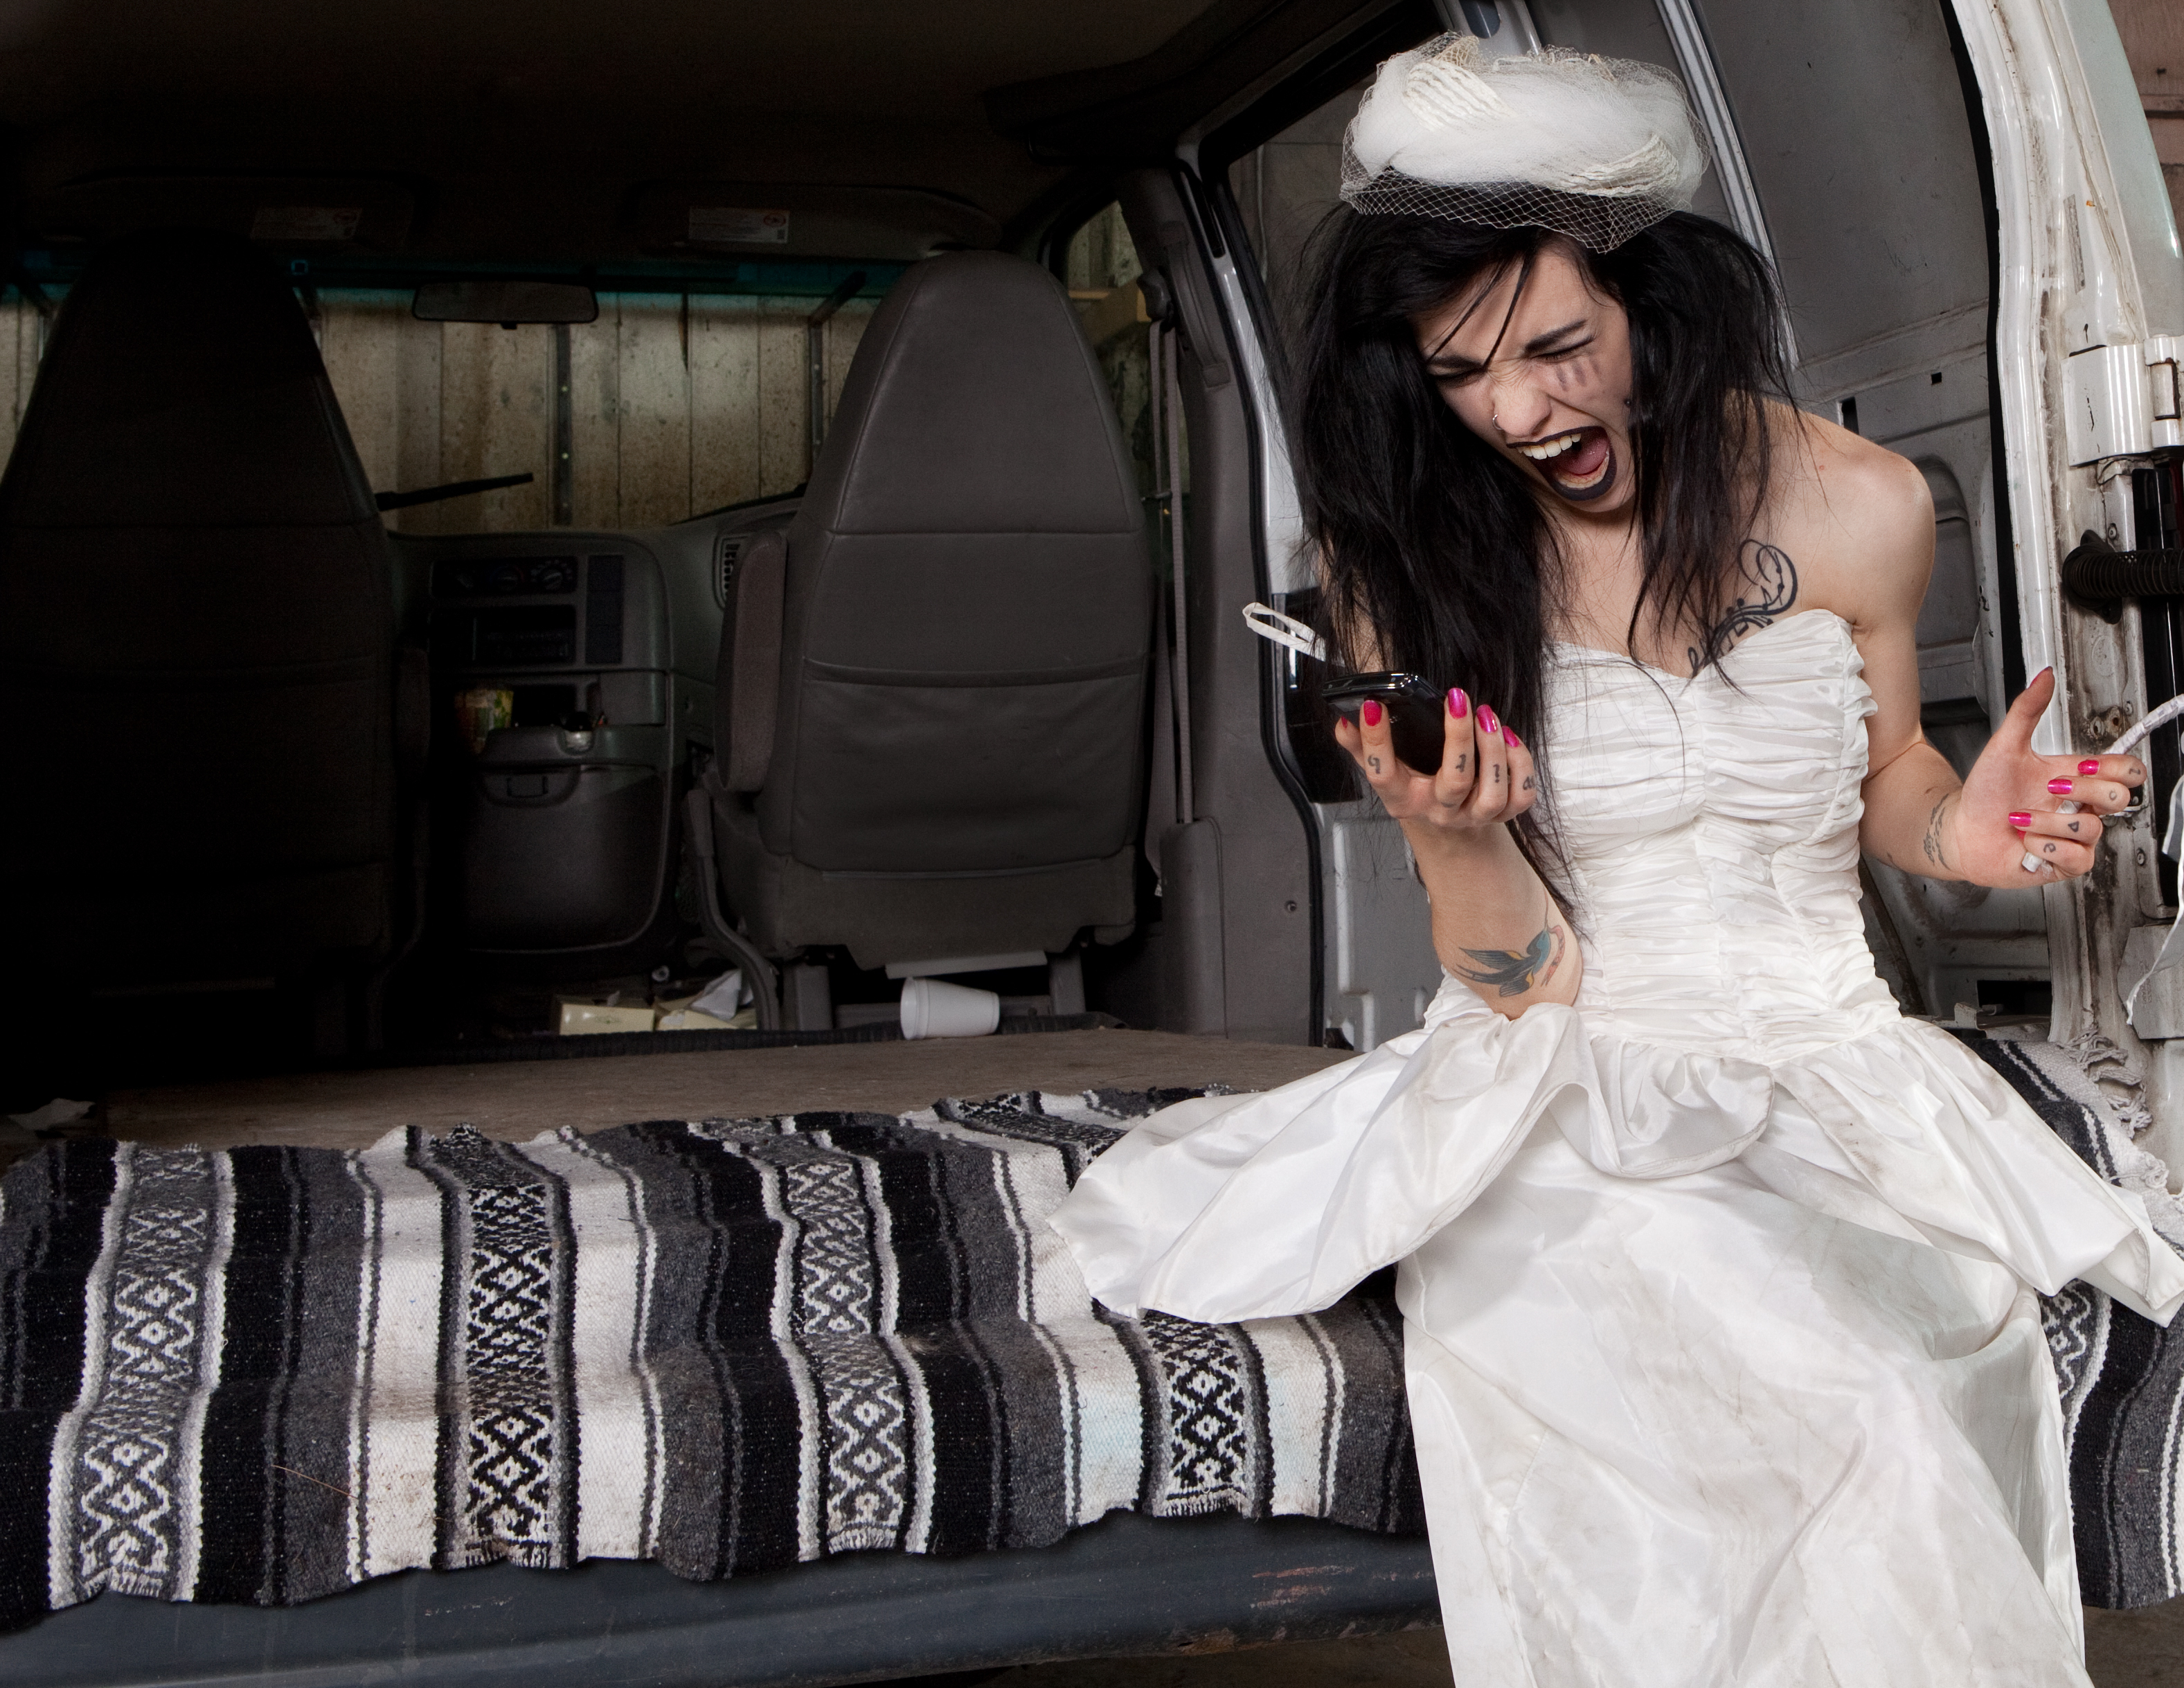 A bride screaming at her phone | Source: Shutterstock